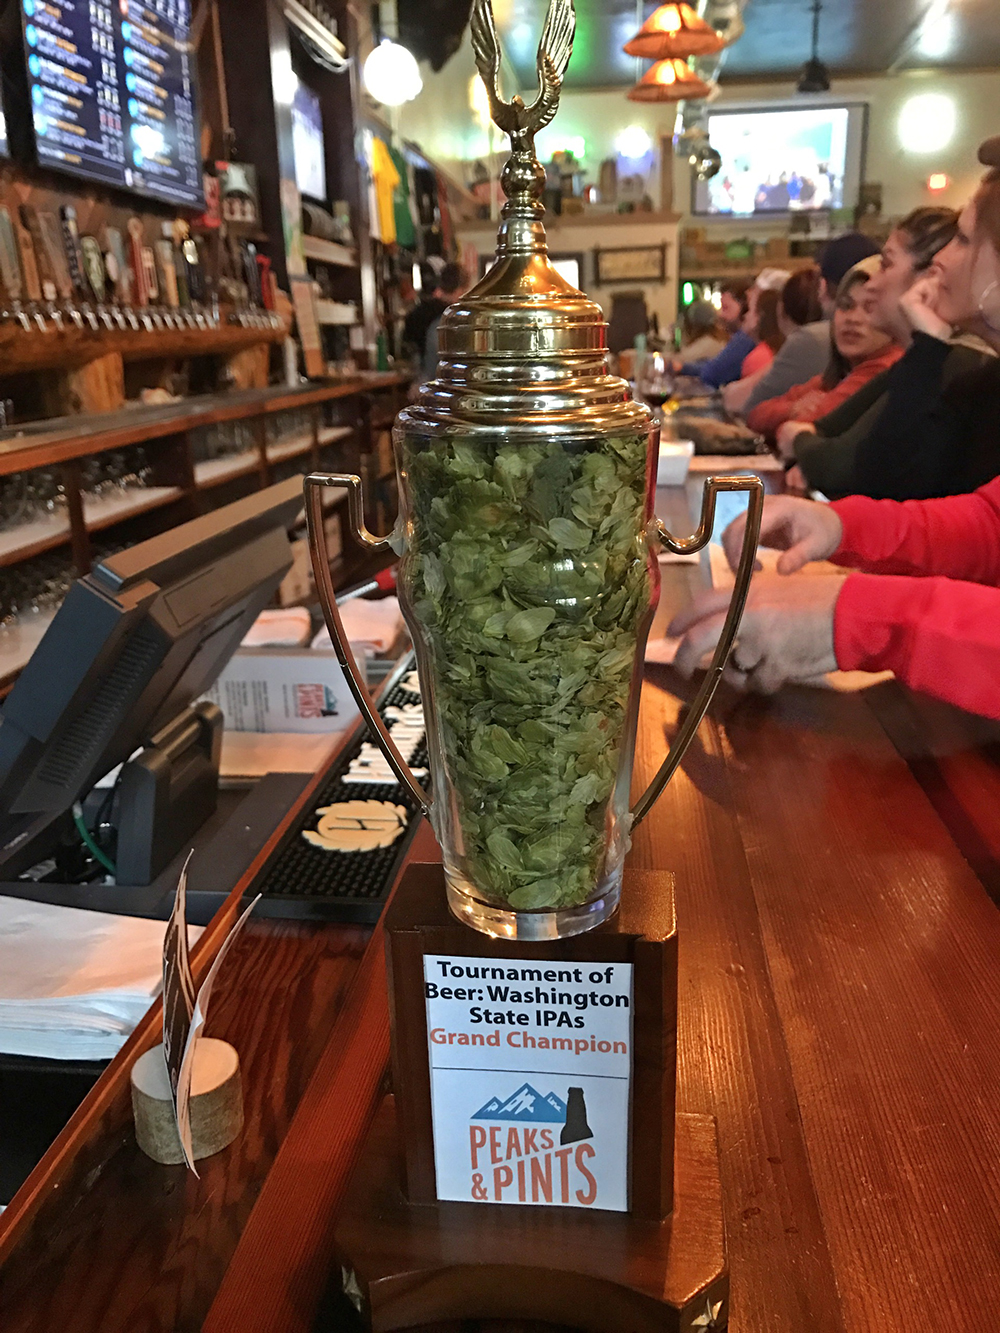 Tournament-of-Washington-IPAs-Champion-crowned-trophy